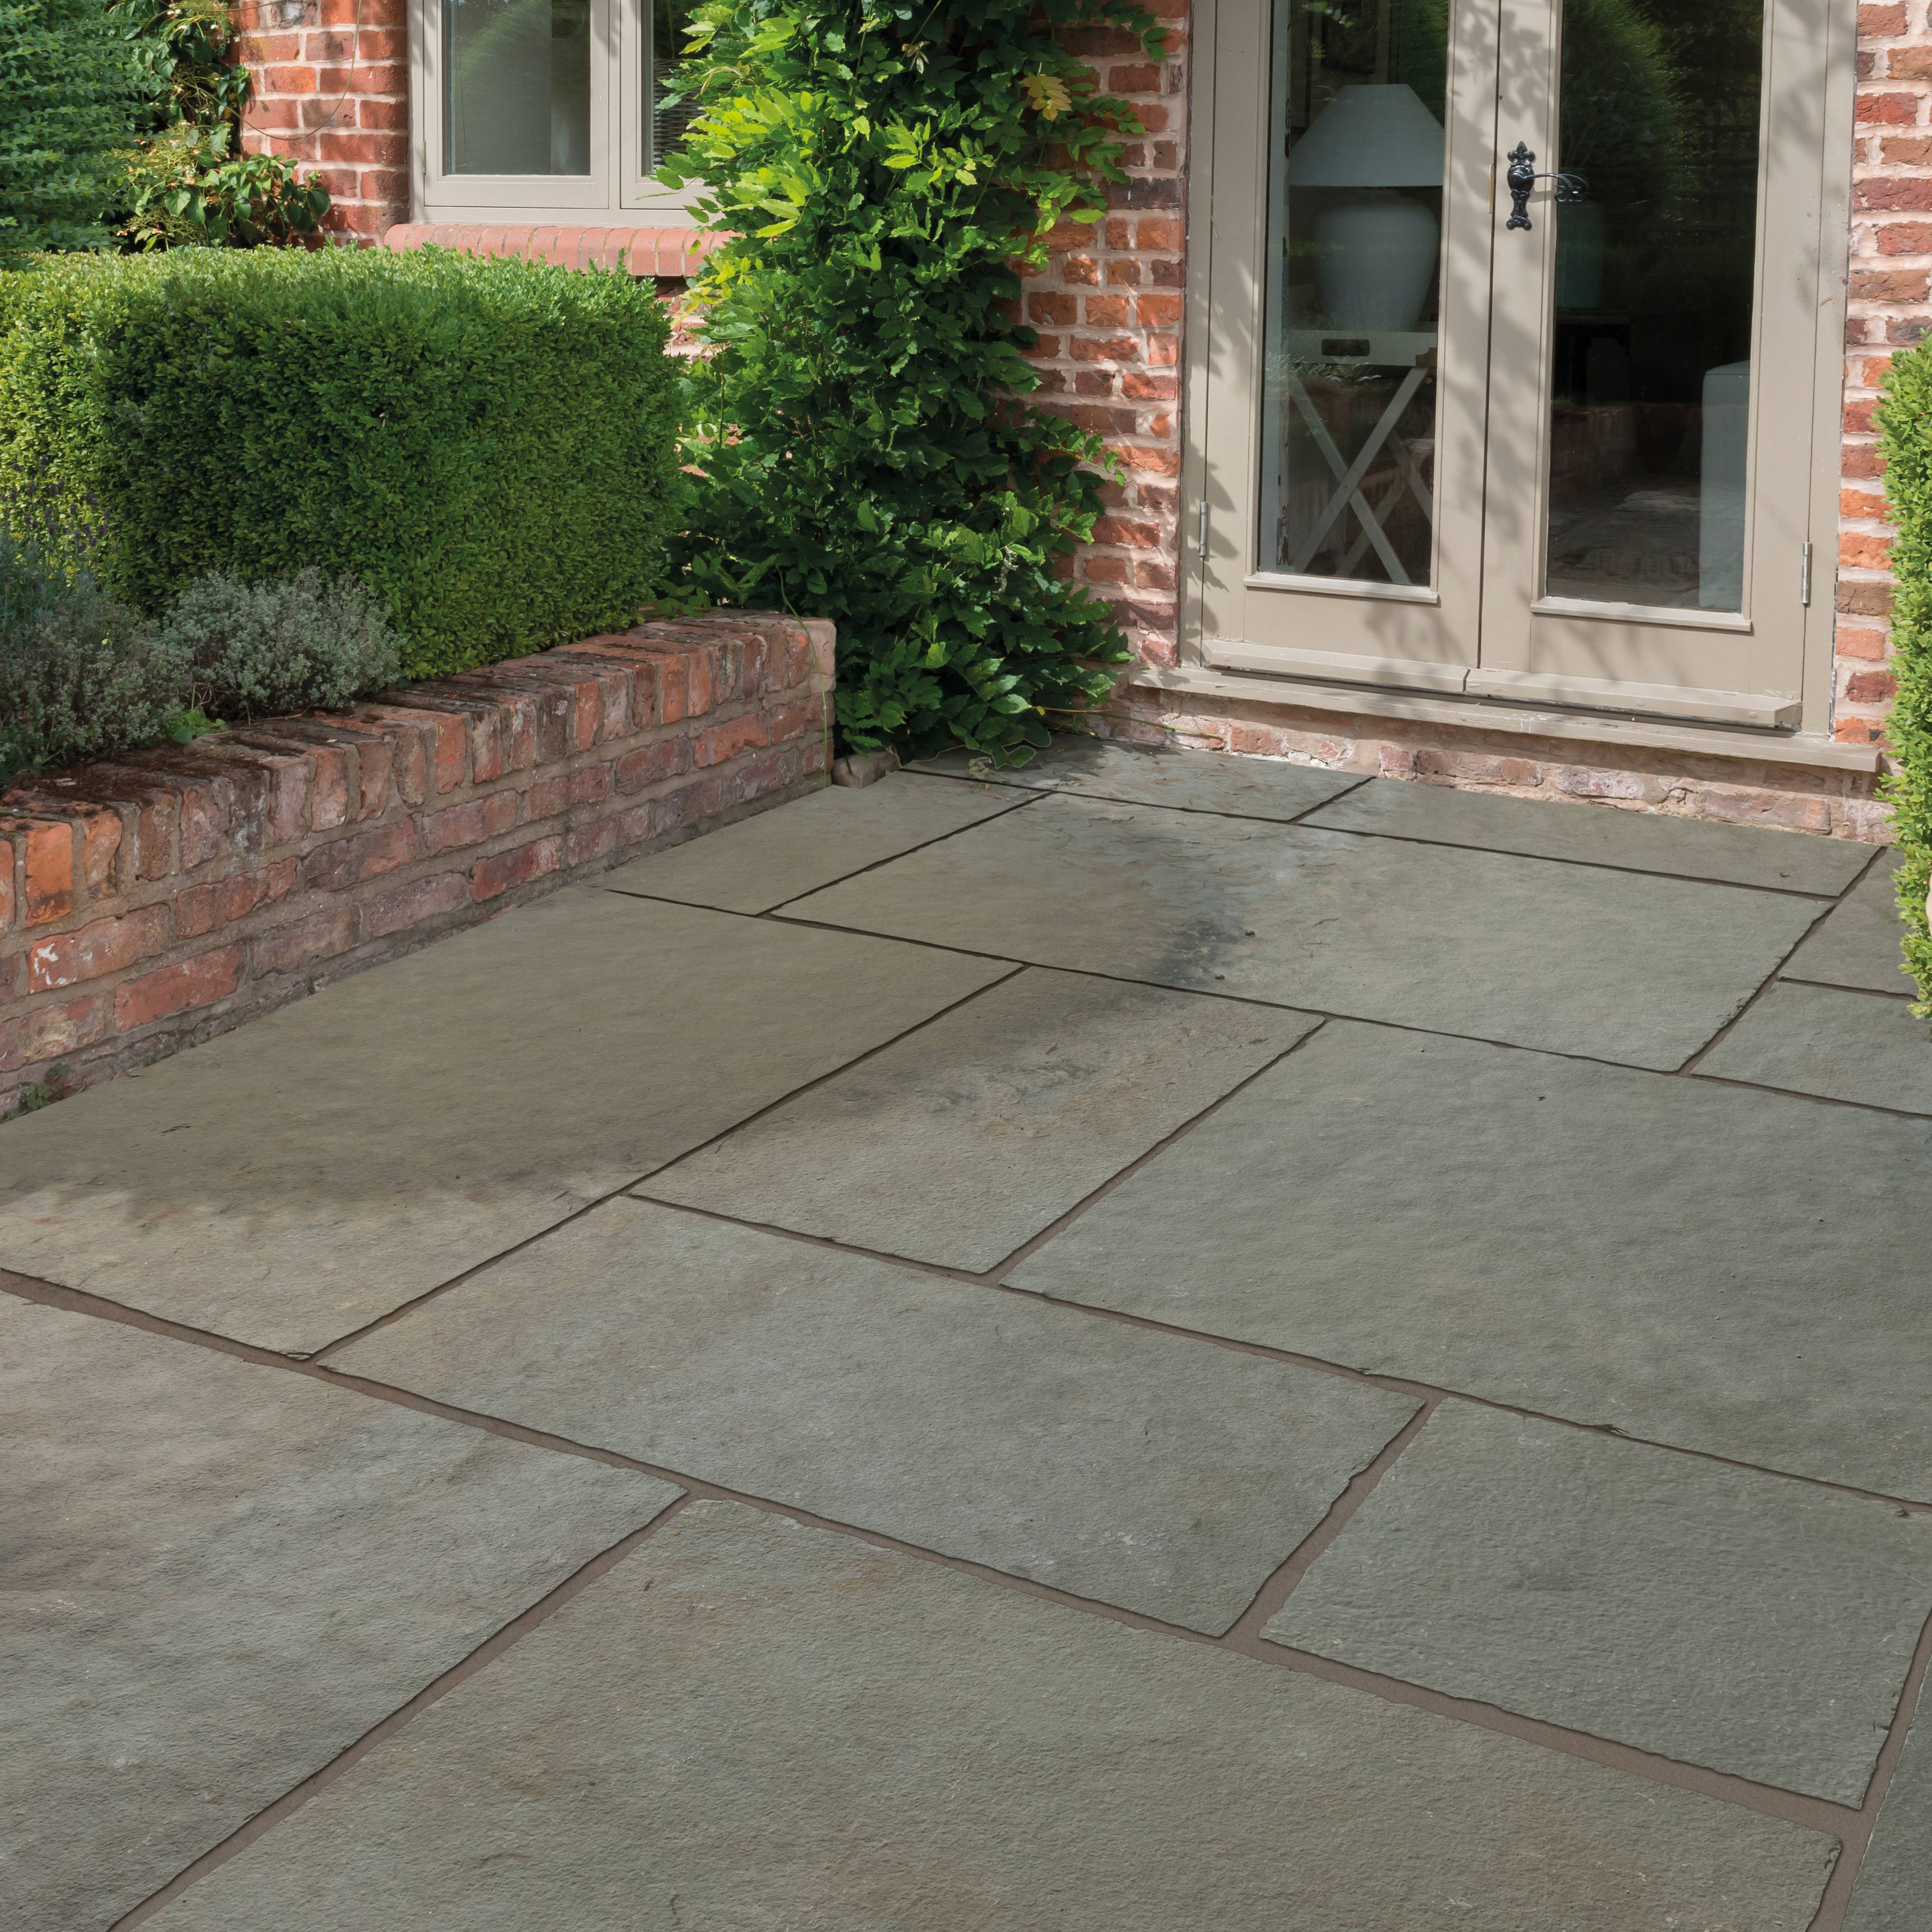 The product varies in colour and shade due to the natural element of the paving.